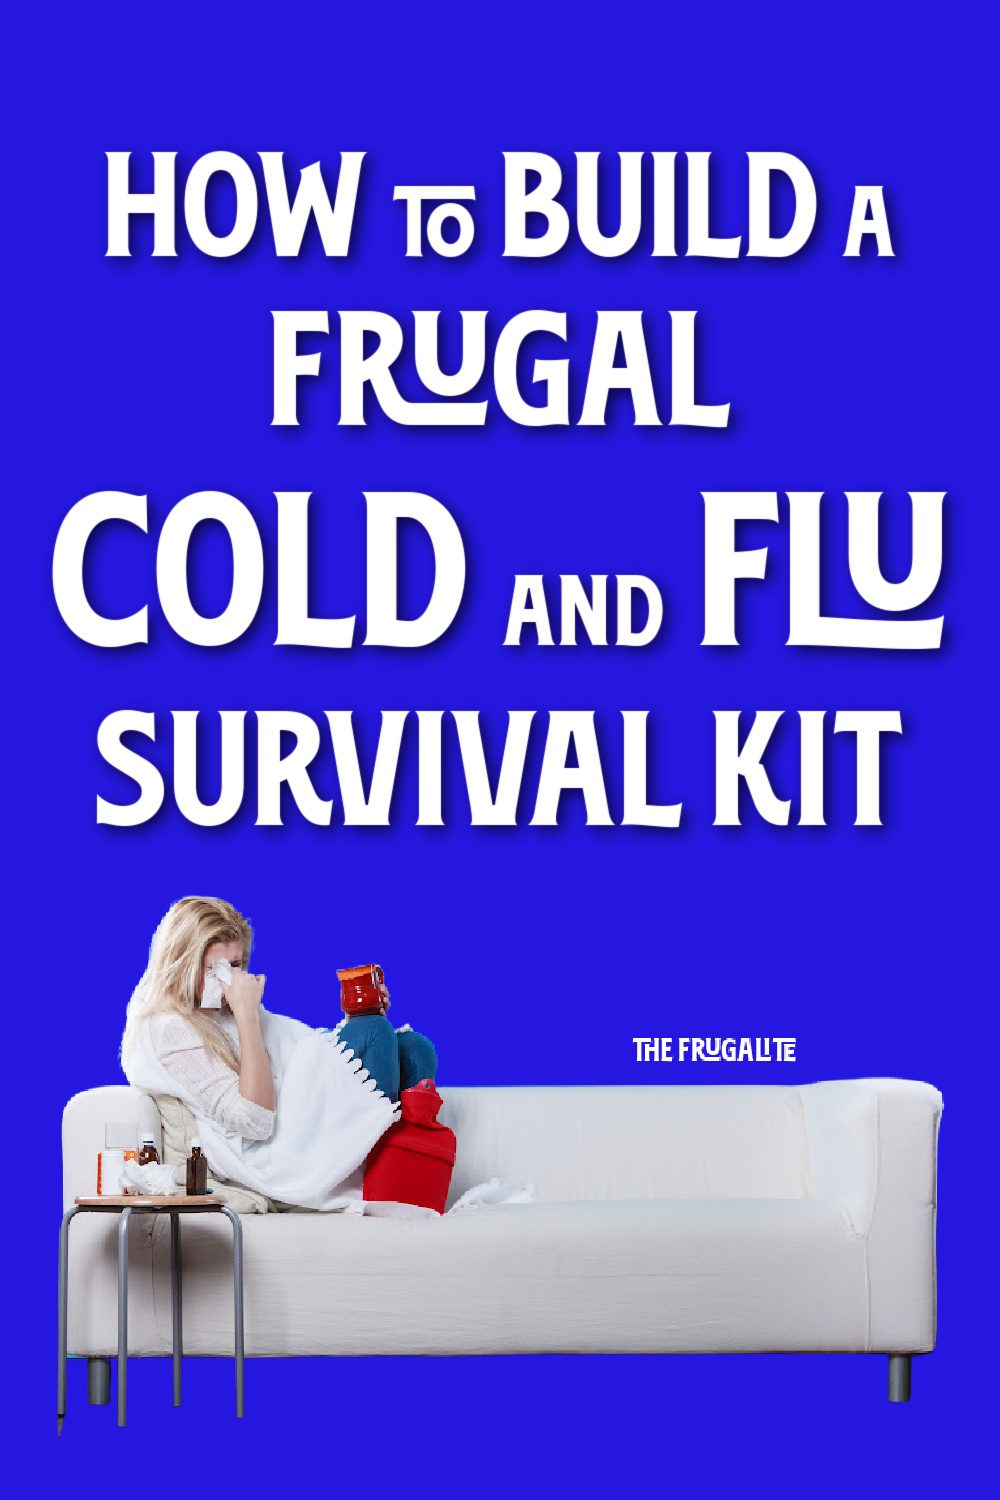 How to Build a Frugal Cold and Flu Survival Kit